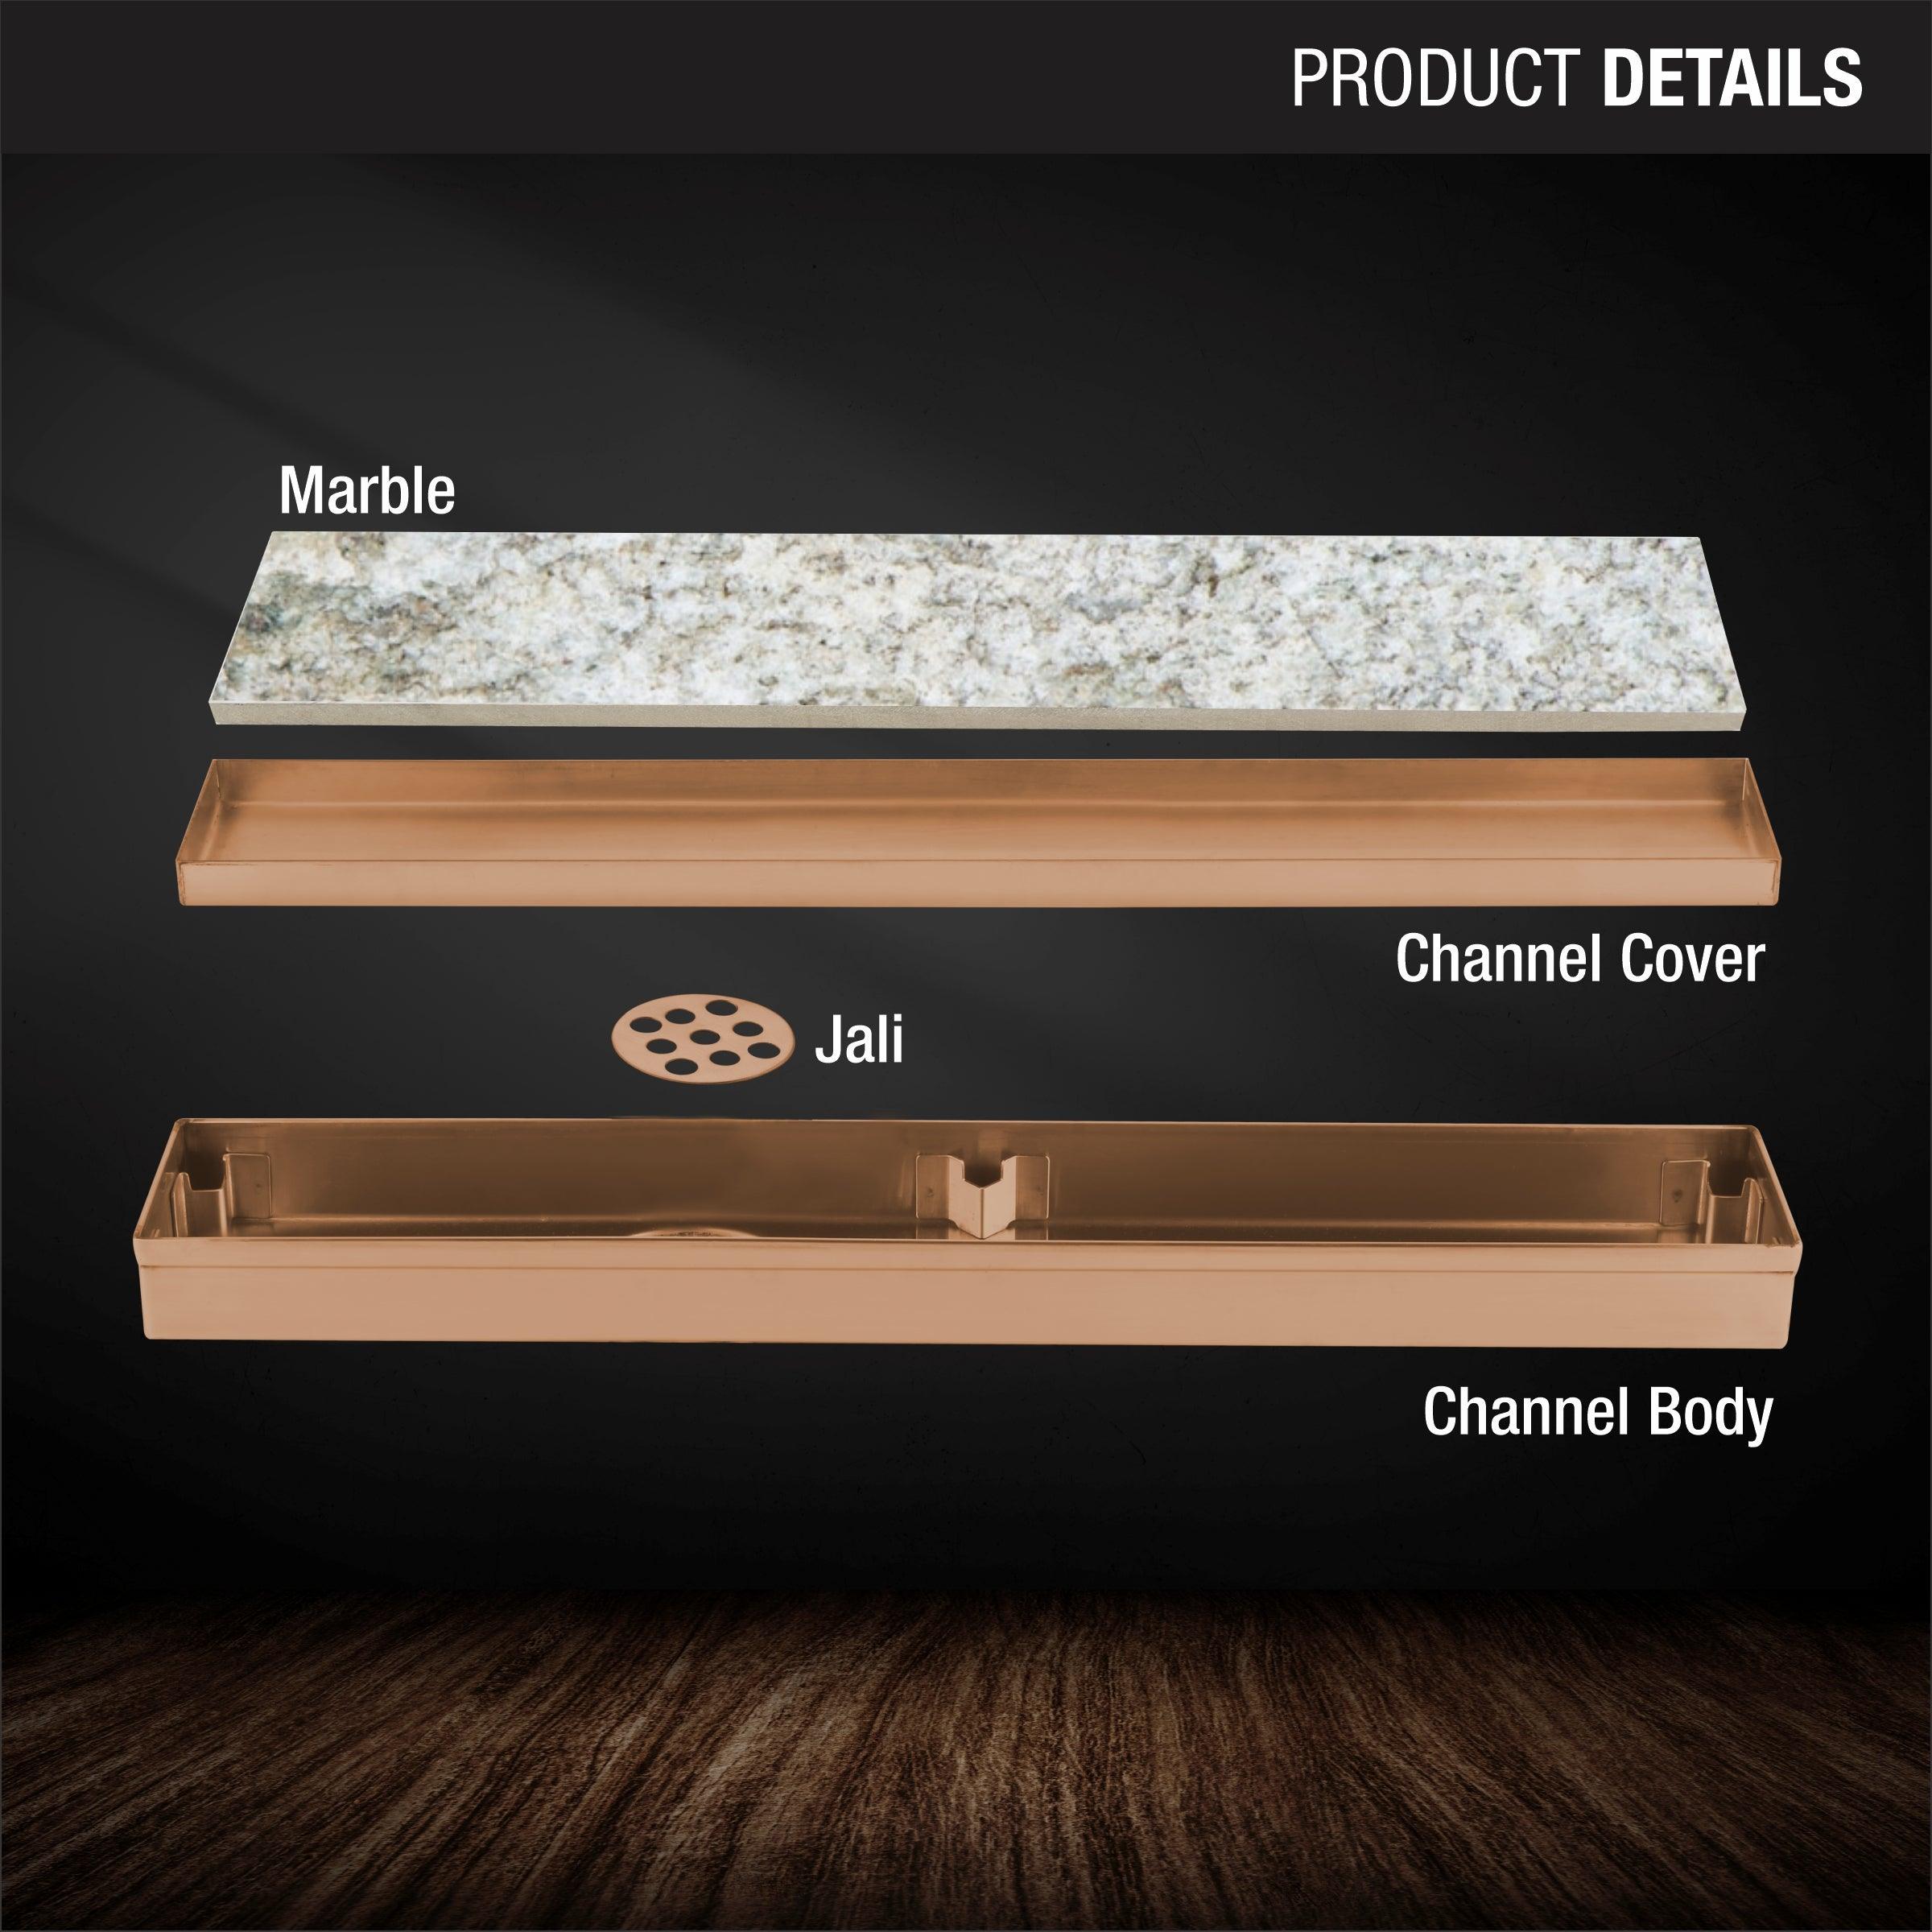 Marble Insert Shower Drain Channel - Antique Copper (12 x 2 Inches) product details